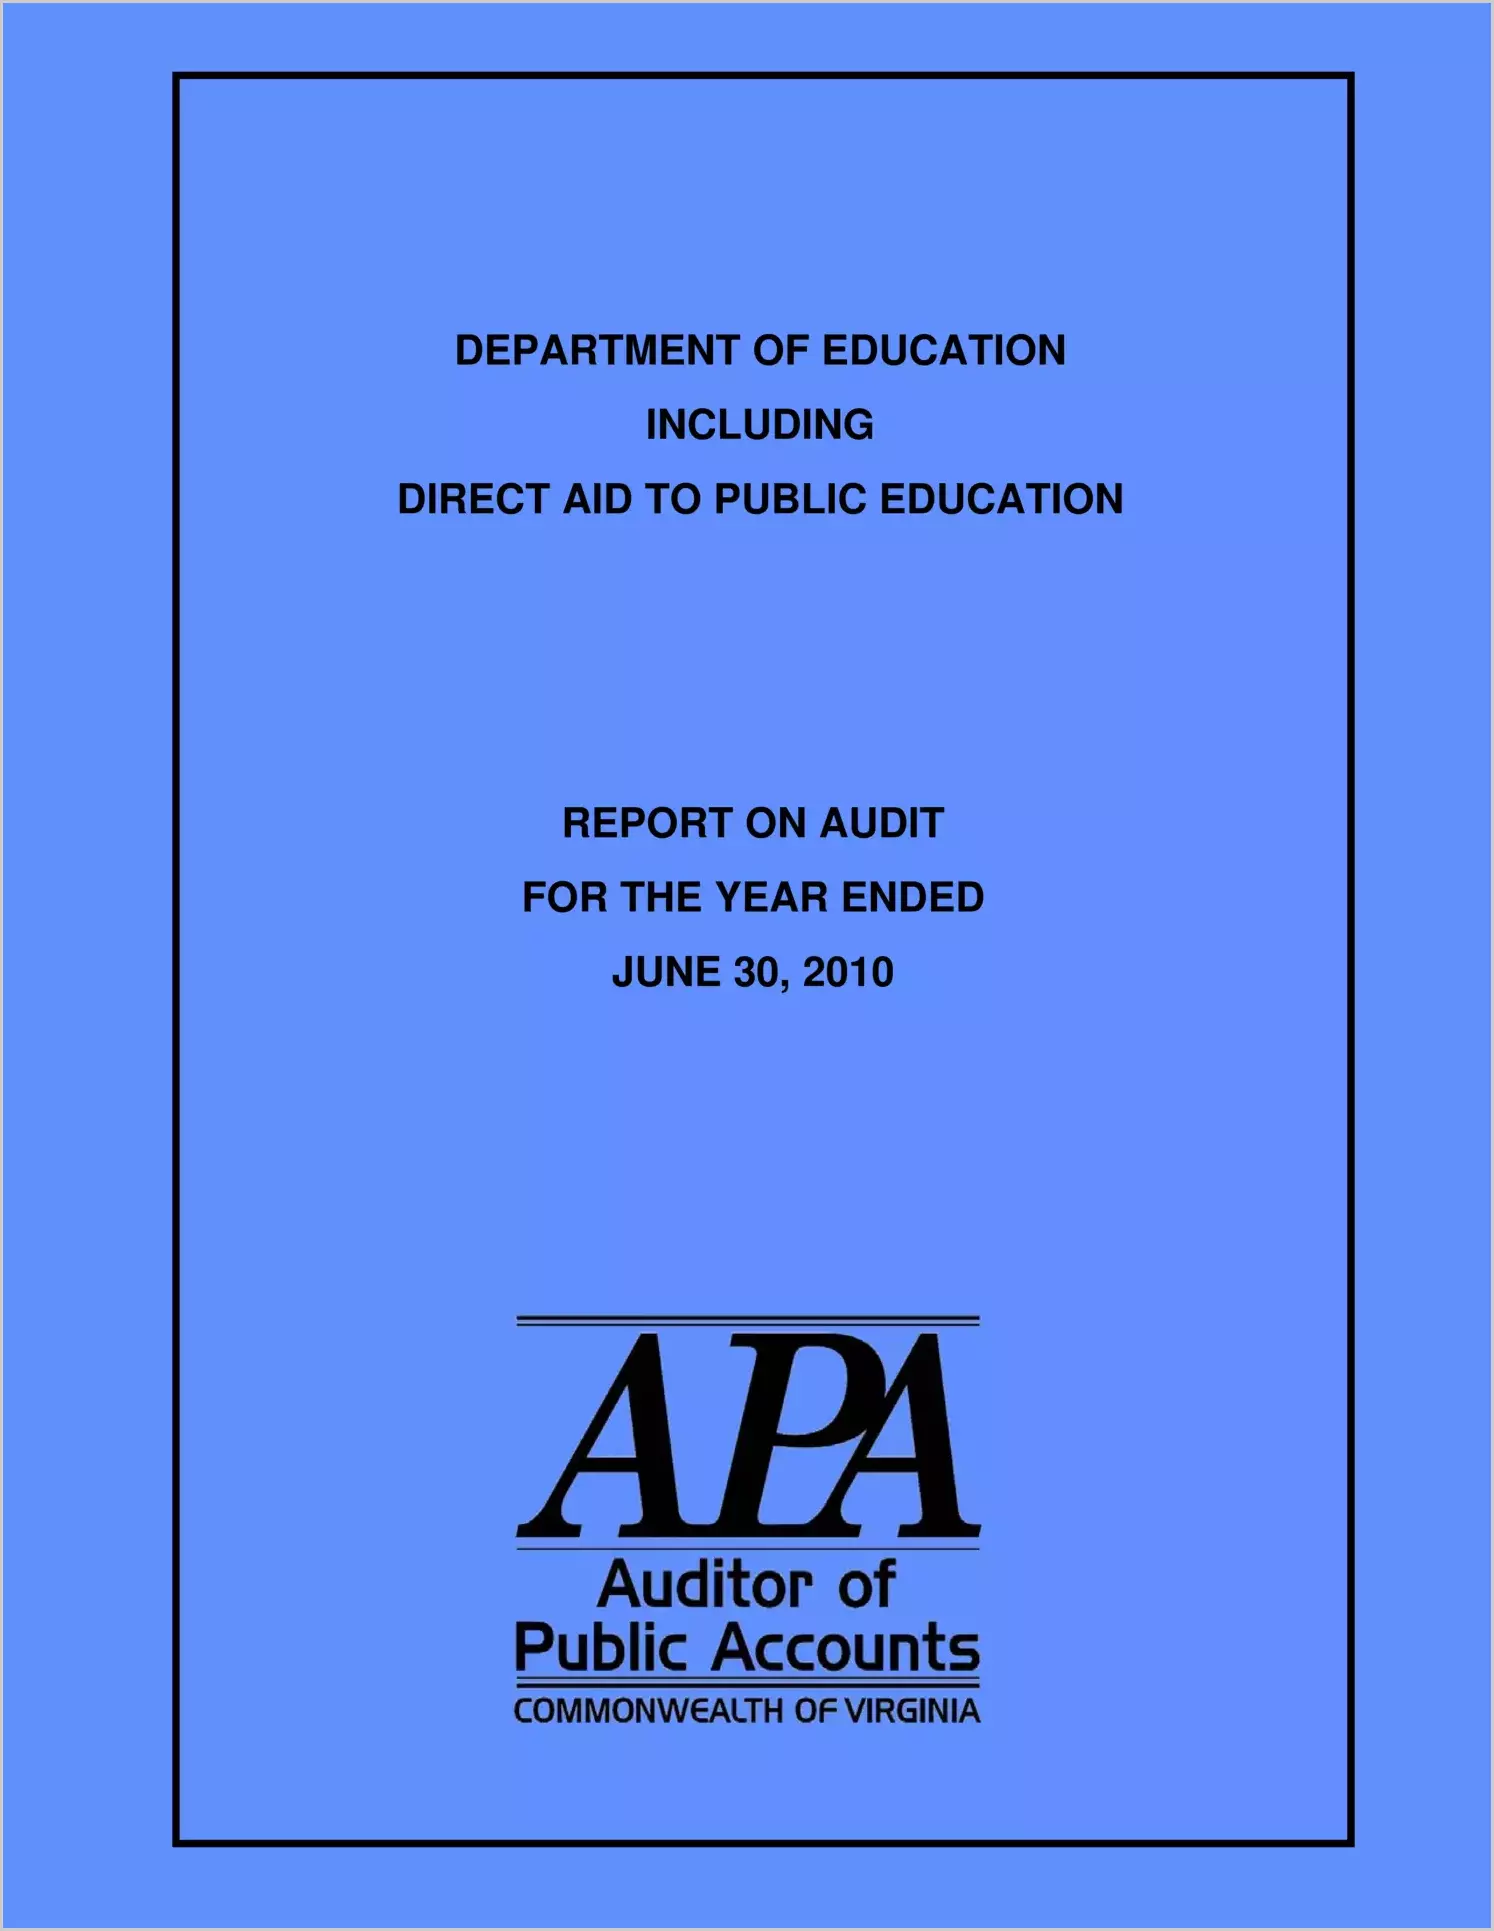 Department of Education Including Direct Aid to Public Education for the year ended June 30, 2010